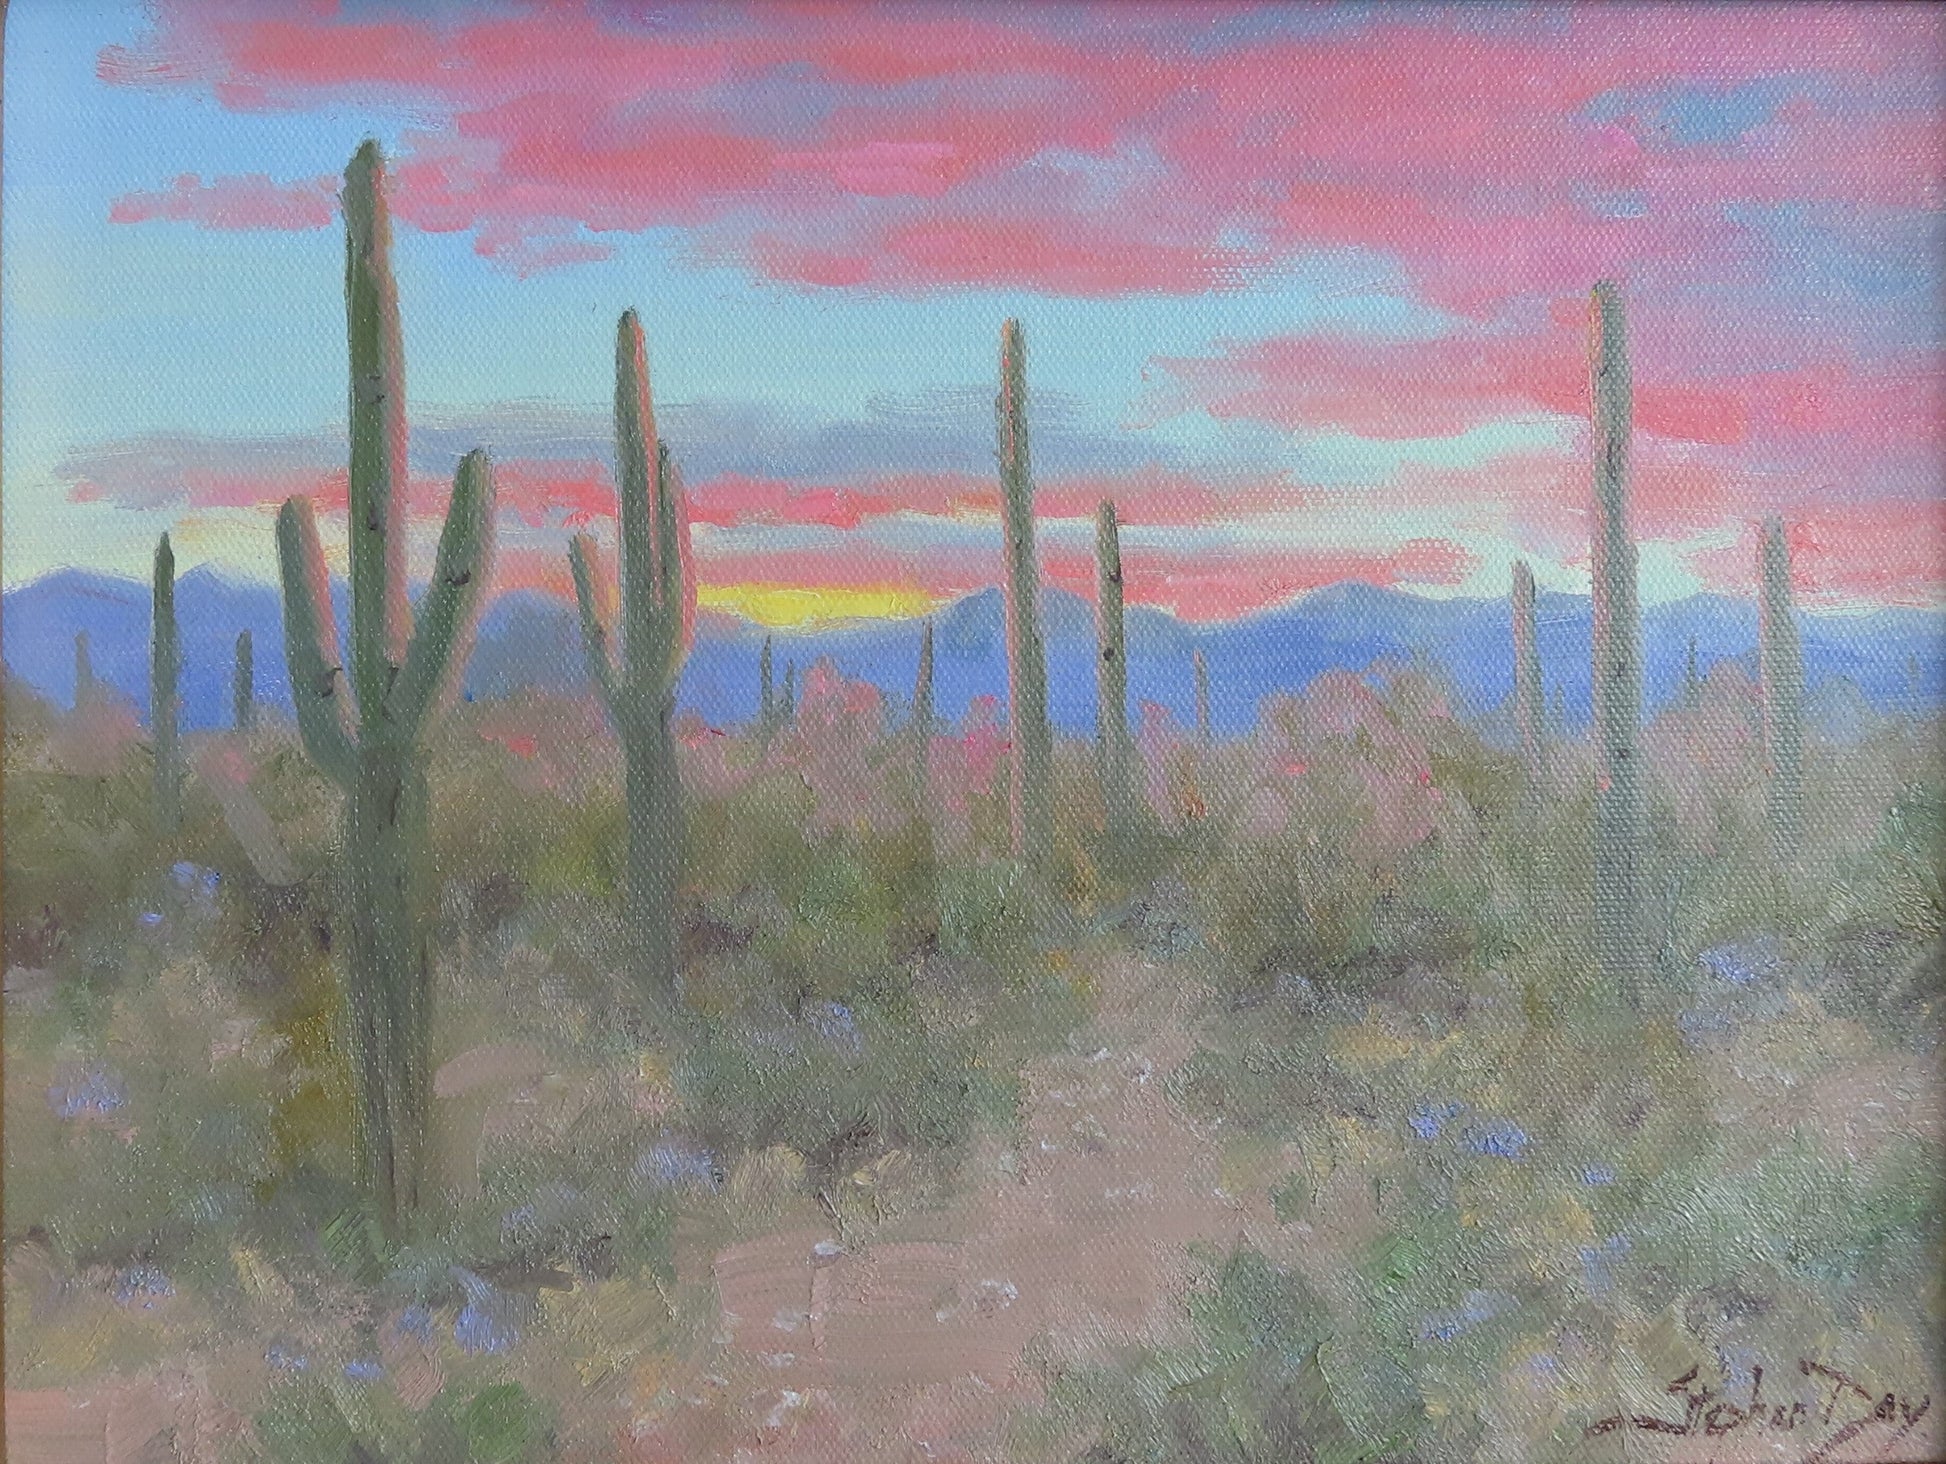 Evening In The Sonoran Desert-painting-Stephen Day-Sorrel Sky Gallery